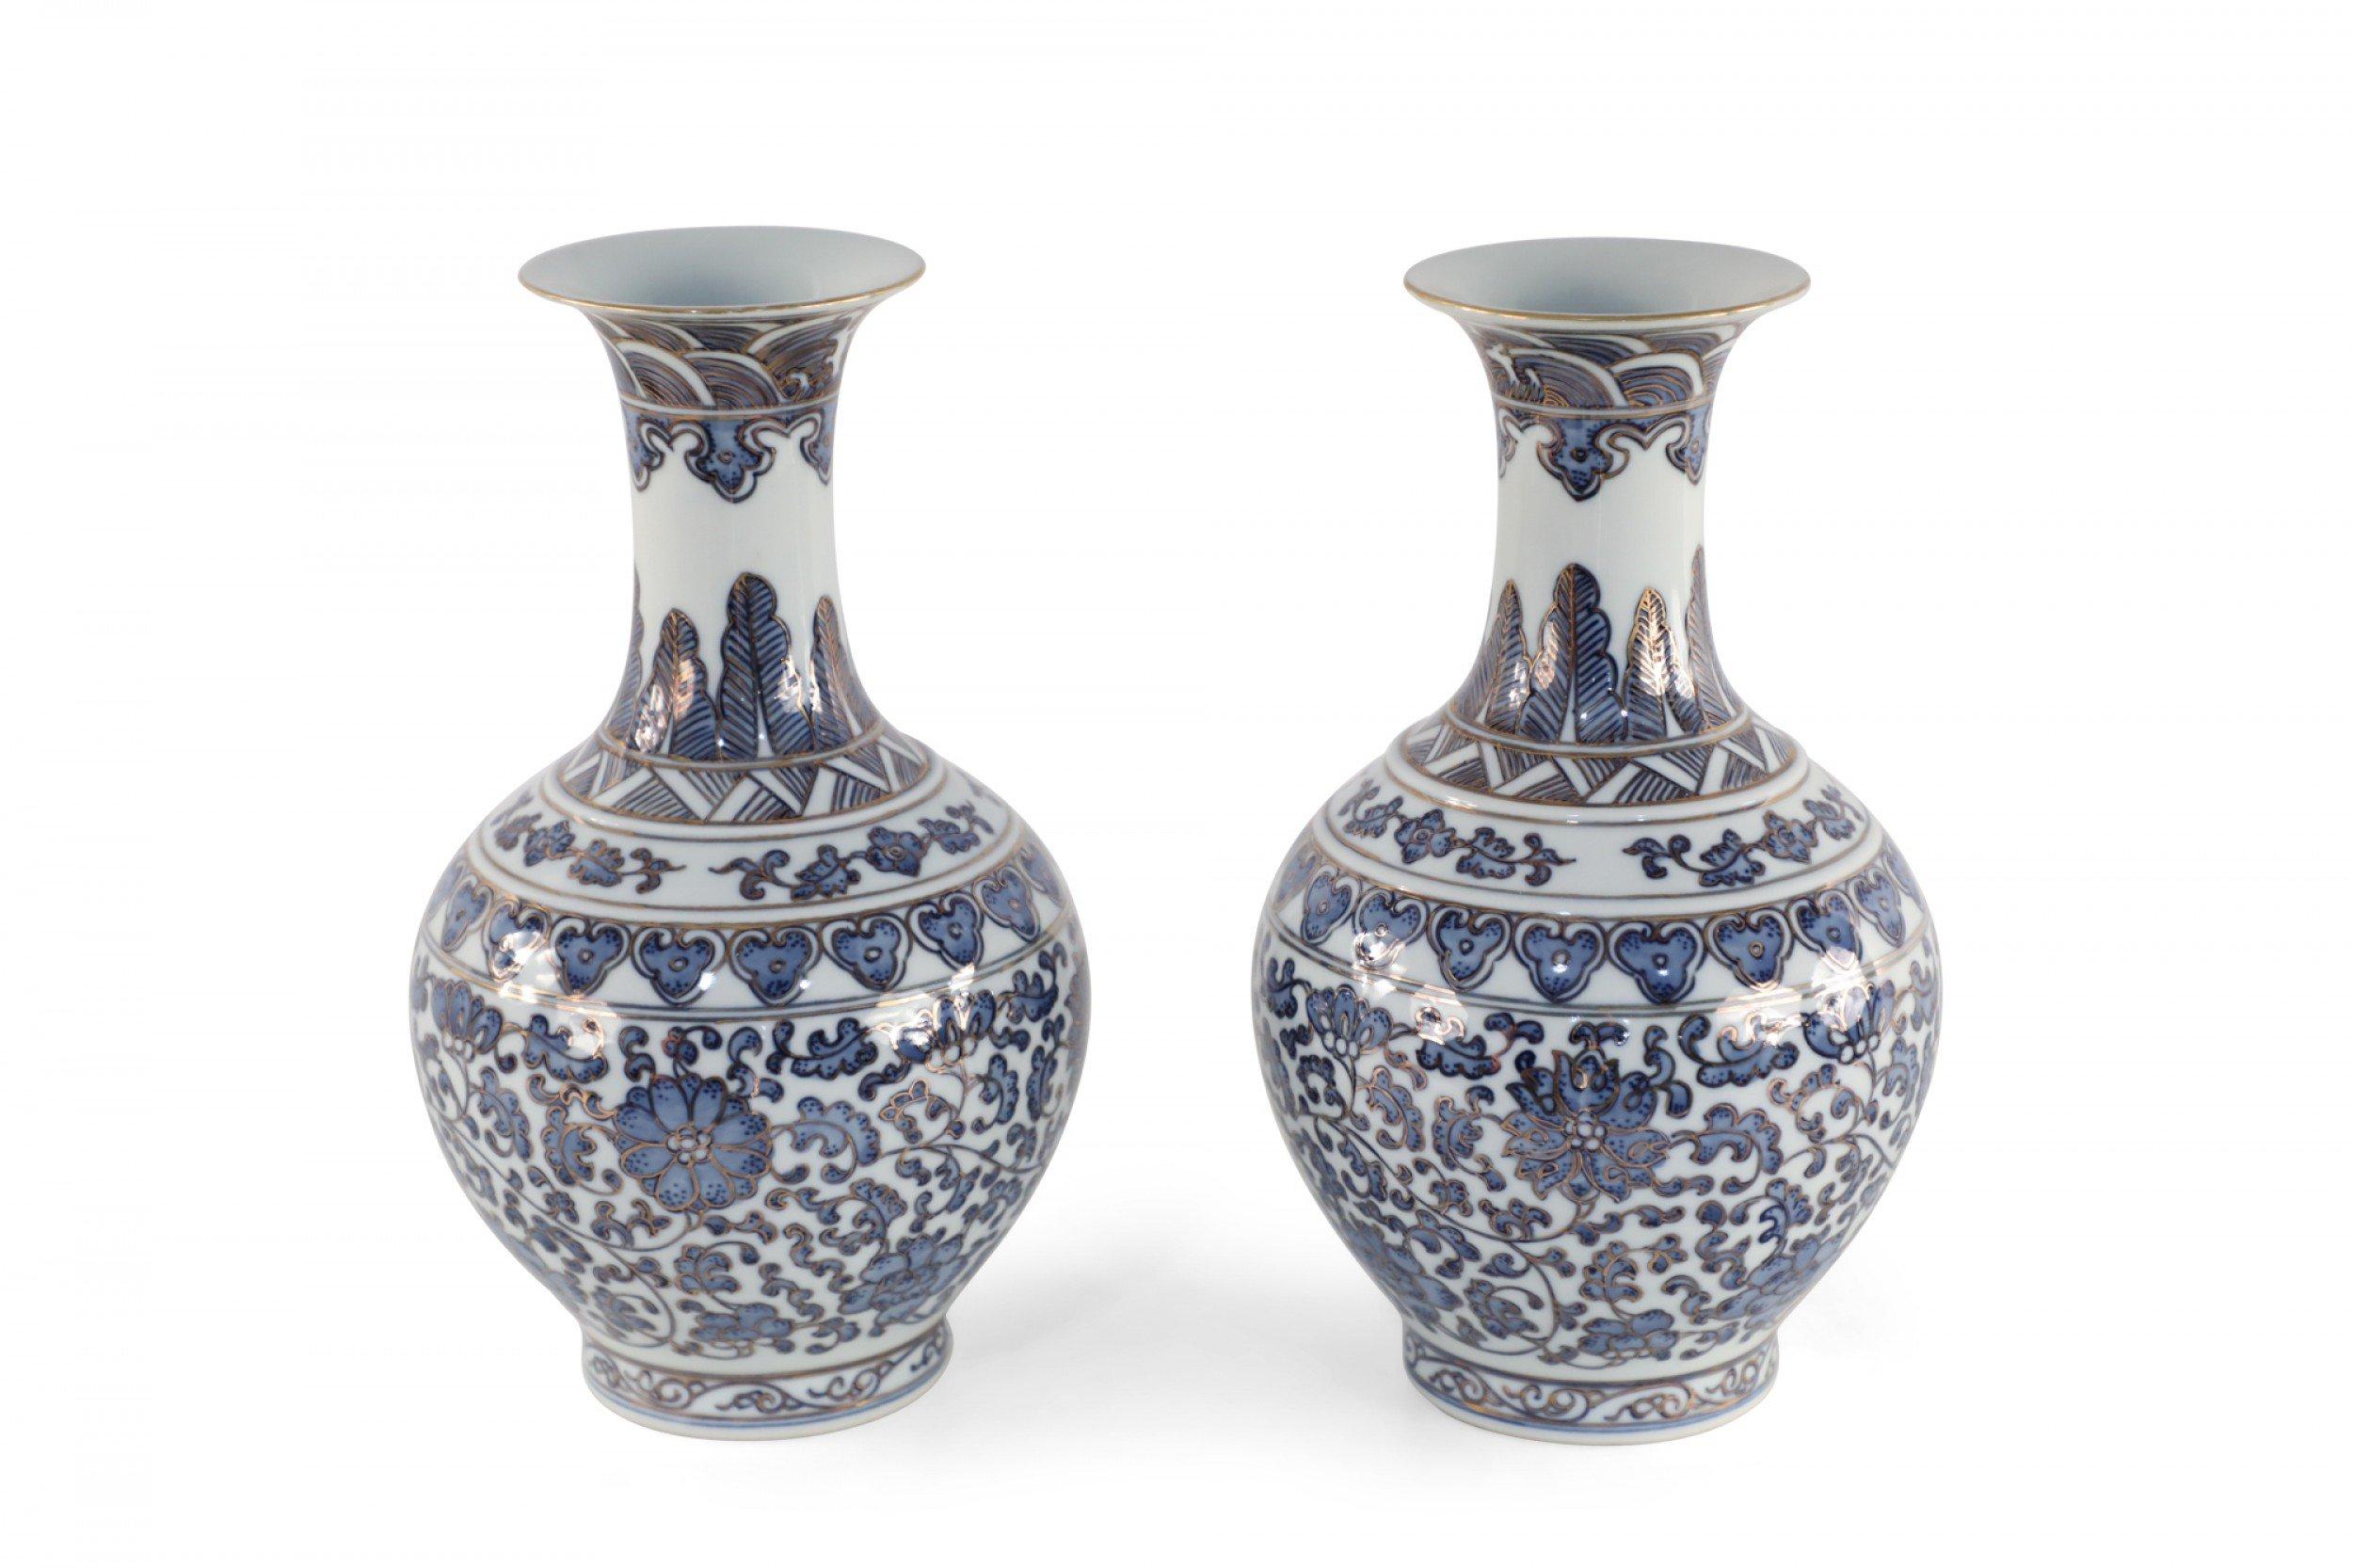 Pair of Chinese Qing Dynasty Qianlong period (18th century) globular, white porcelain vases with blue scroll and floral designs accented by gold line work. (date mark on bottoms) (priced as pair).
  